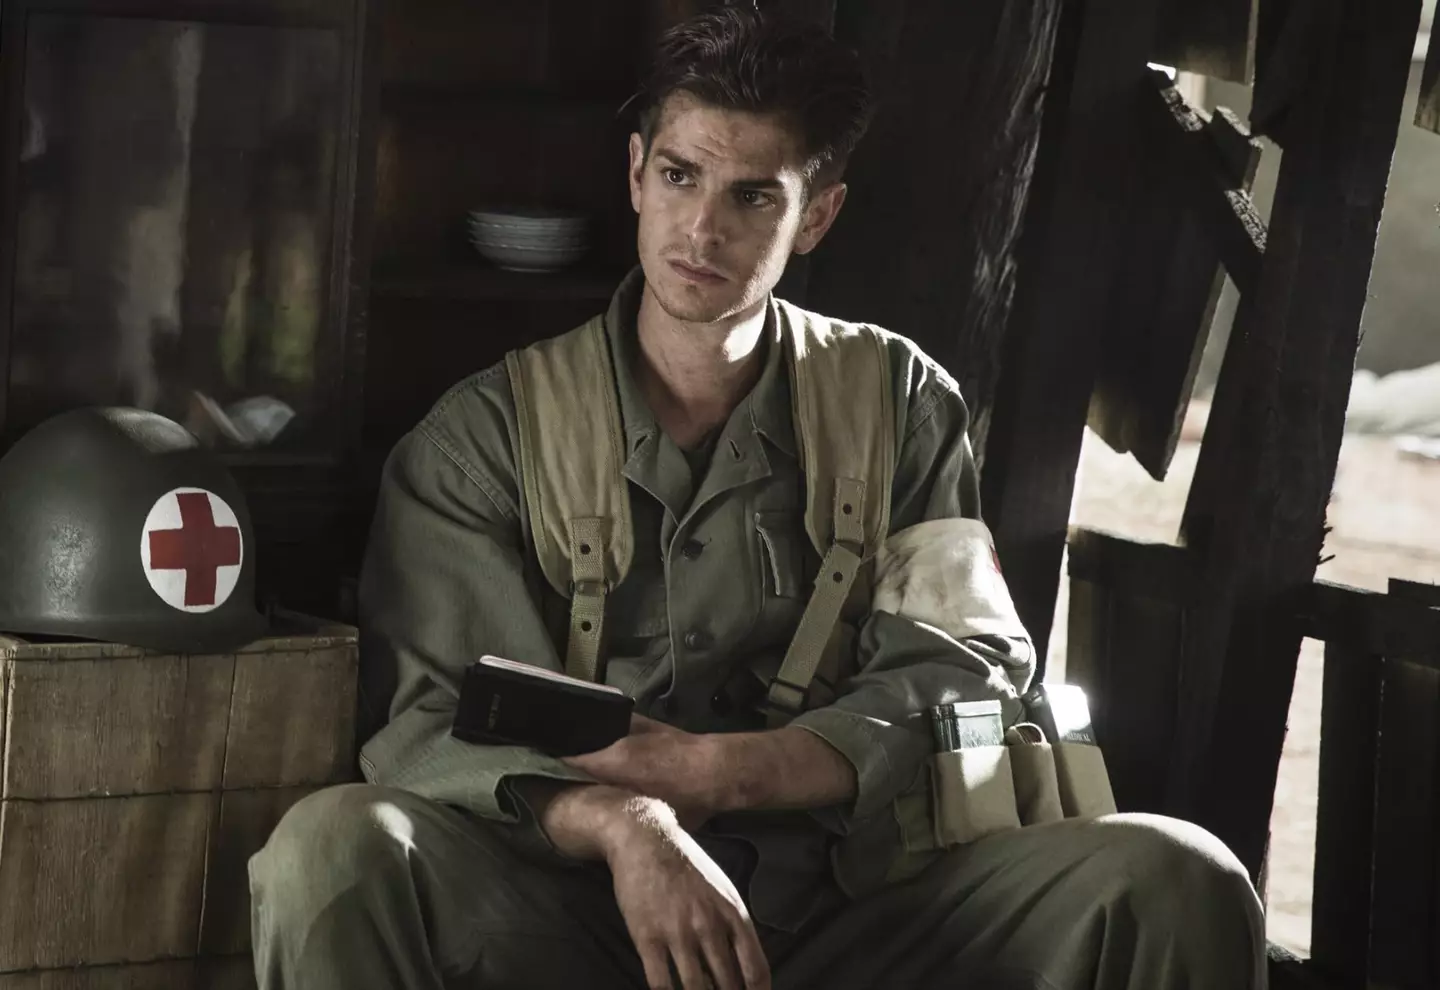 The film earned Andrew Garfield his first-ever Oscar nomination.